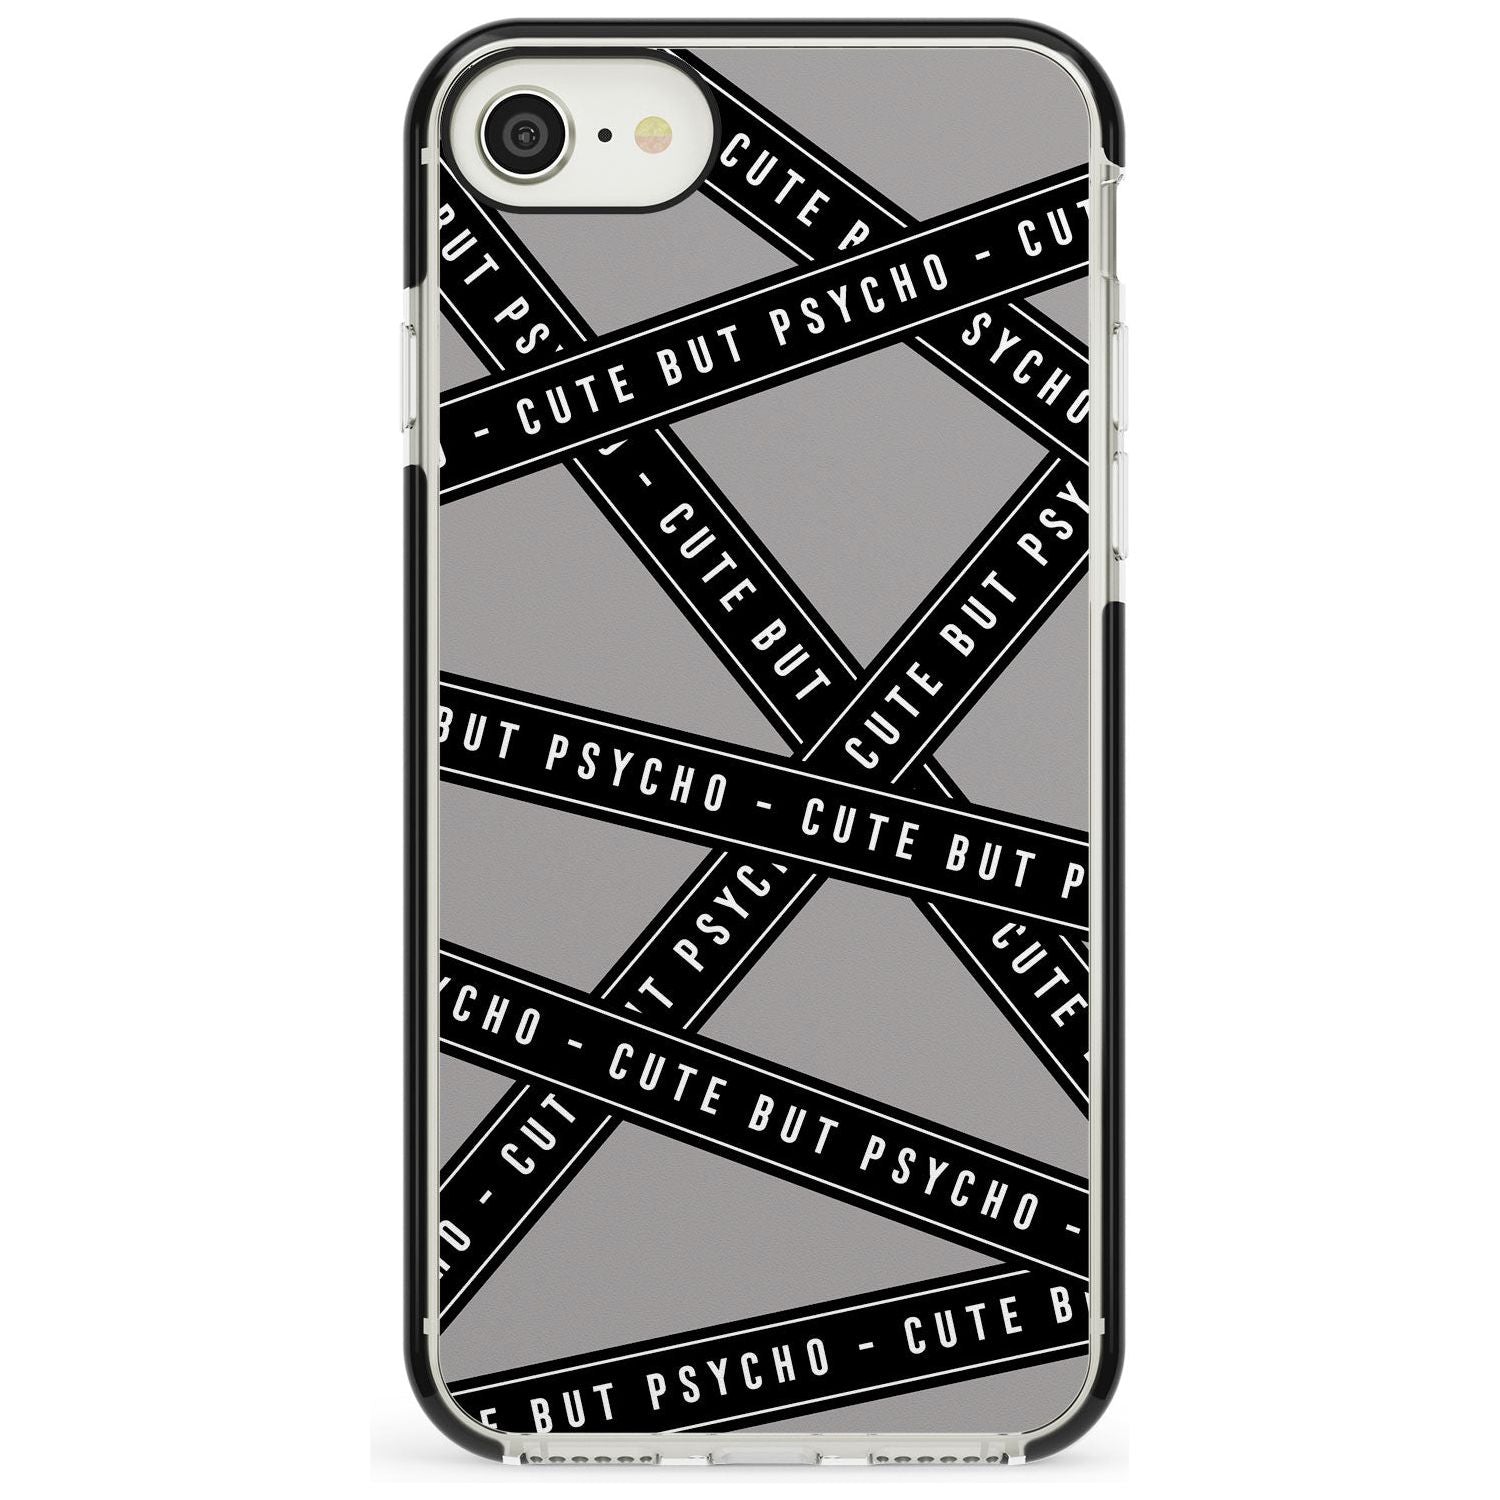 Caution Tape Phrases Cute But Psycho Black Impact Phone Case for iPhone SE 8 7 Plus